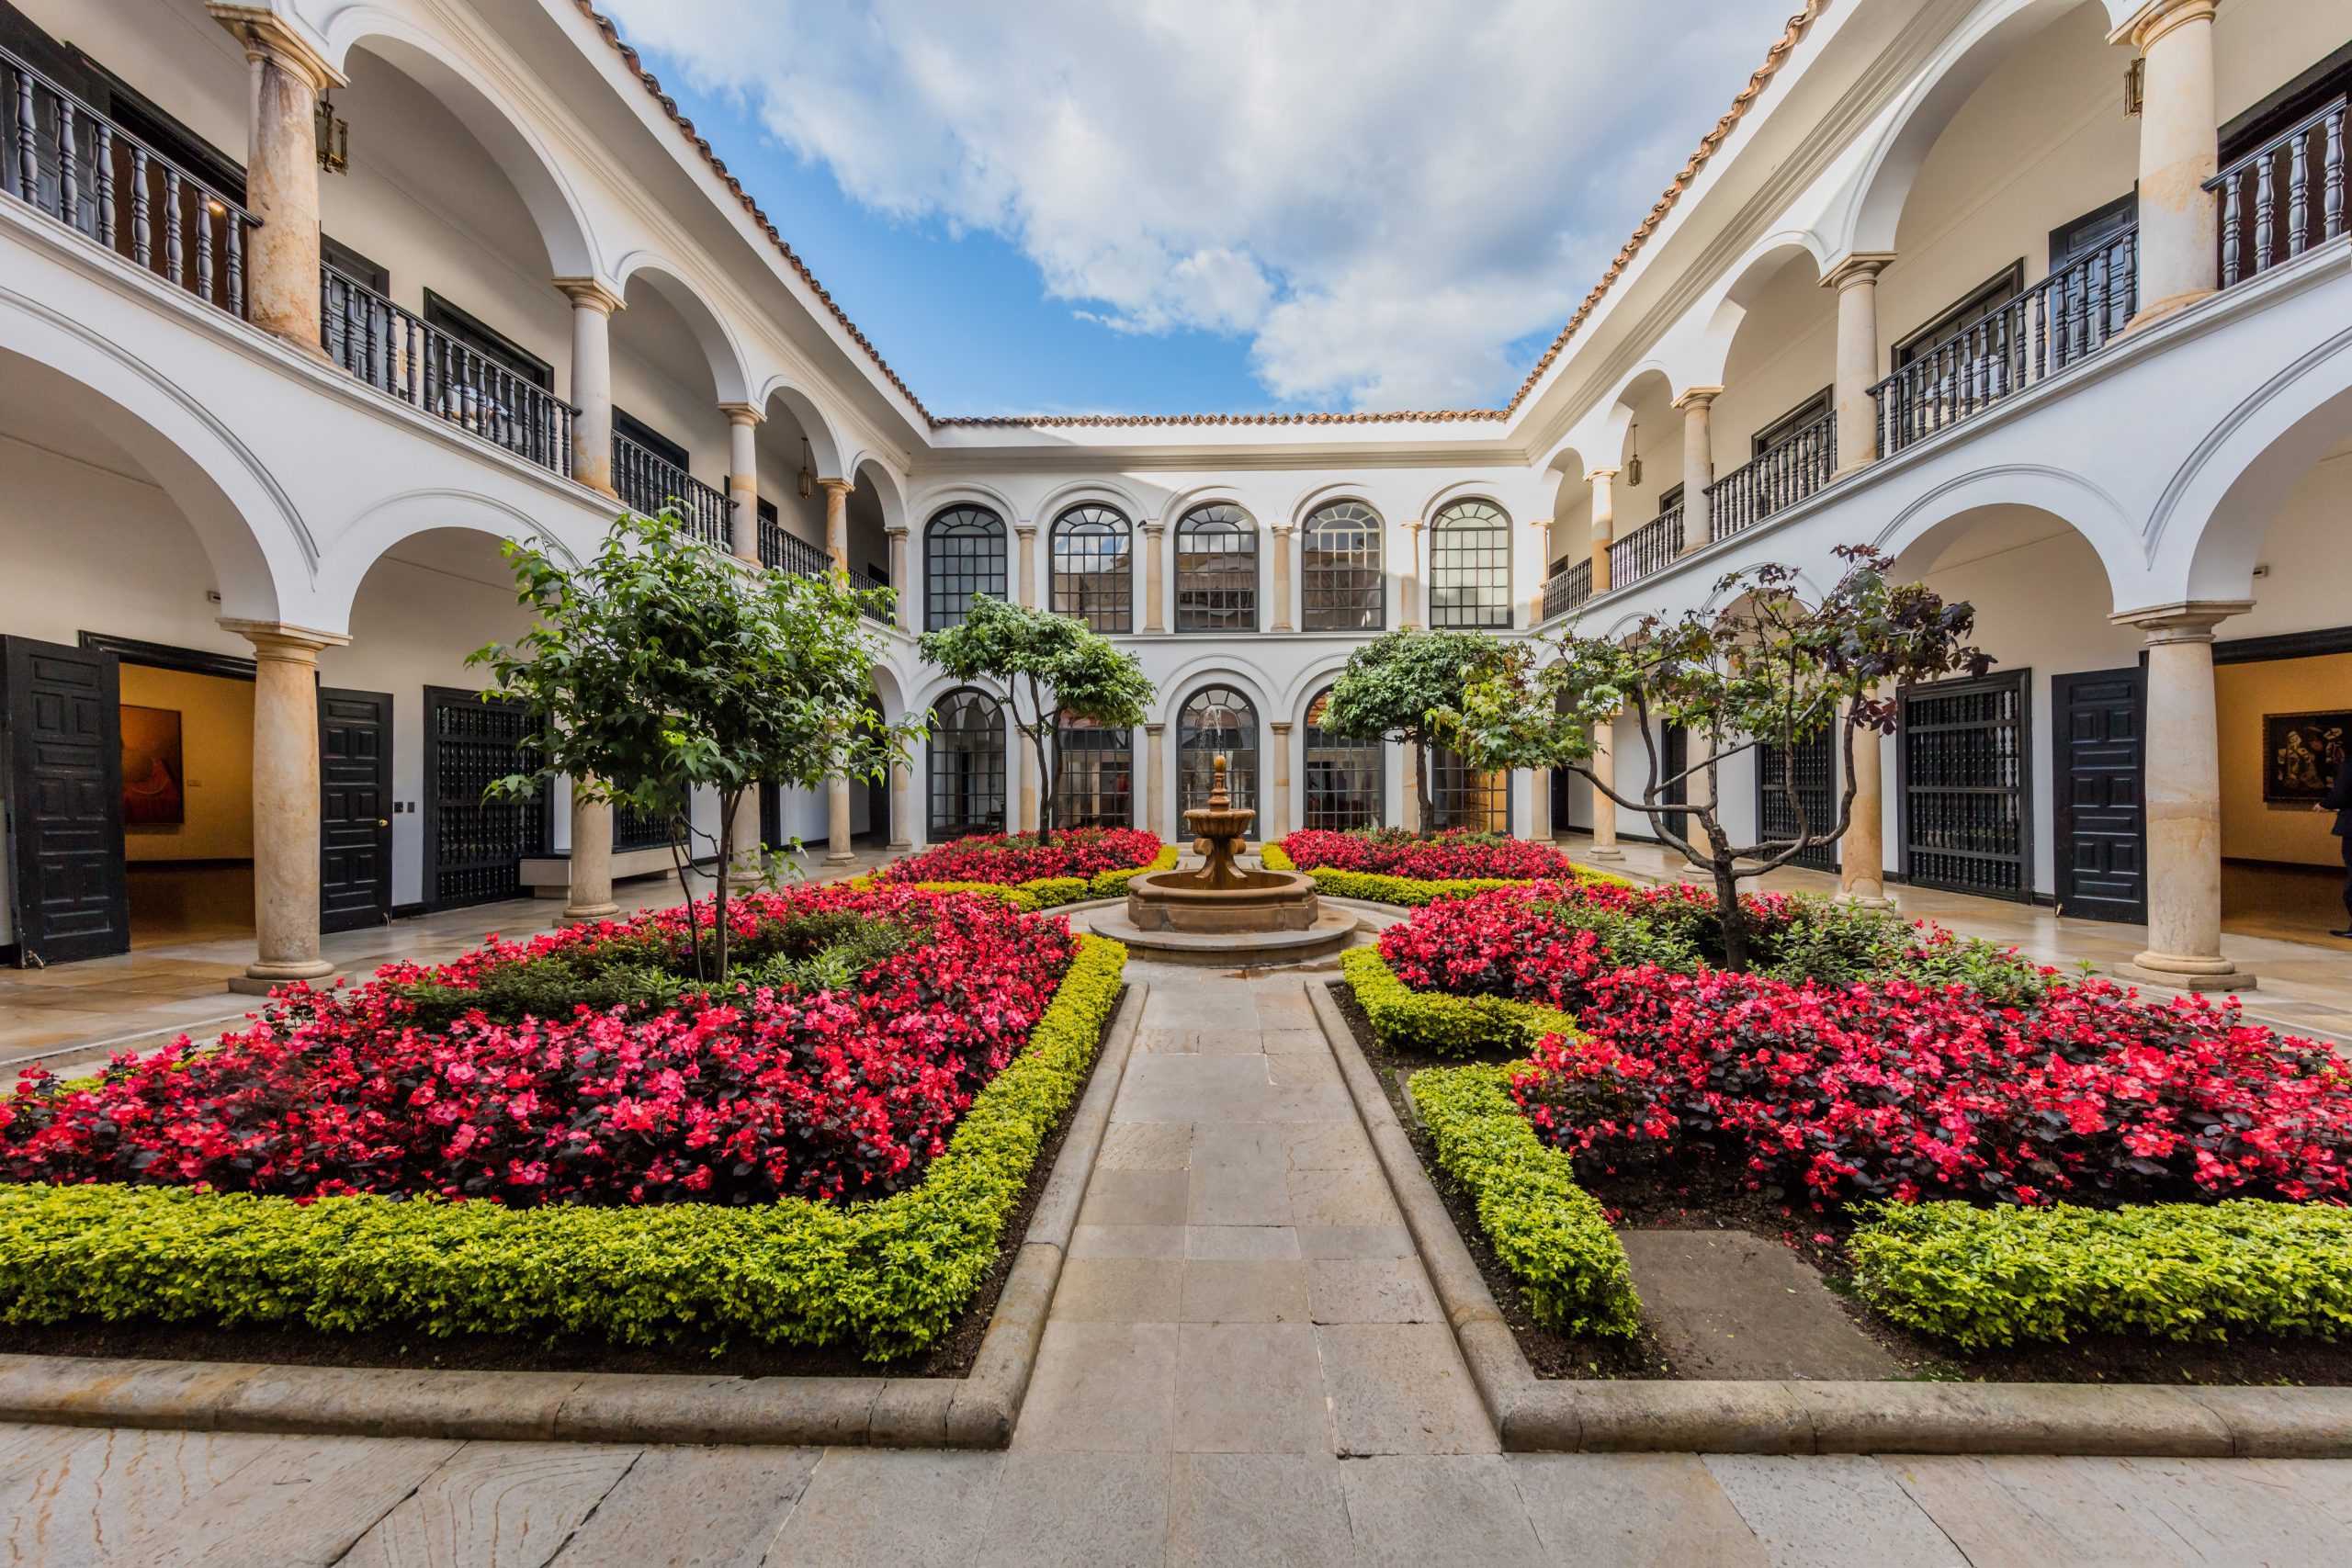 a courtyard with a fountain surrounded by flowers.